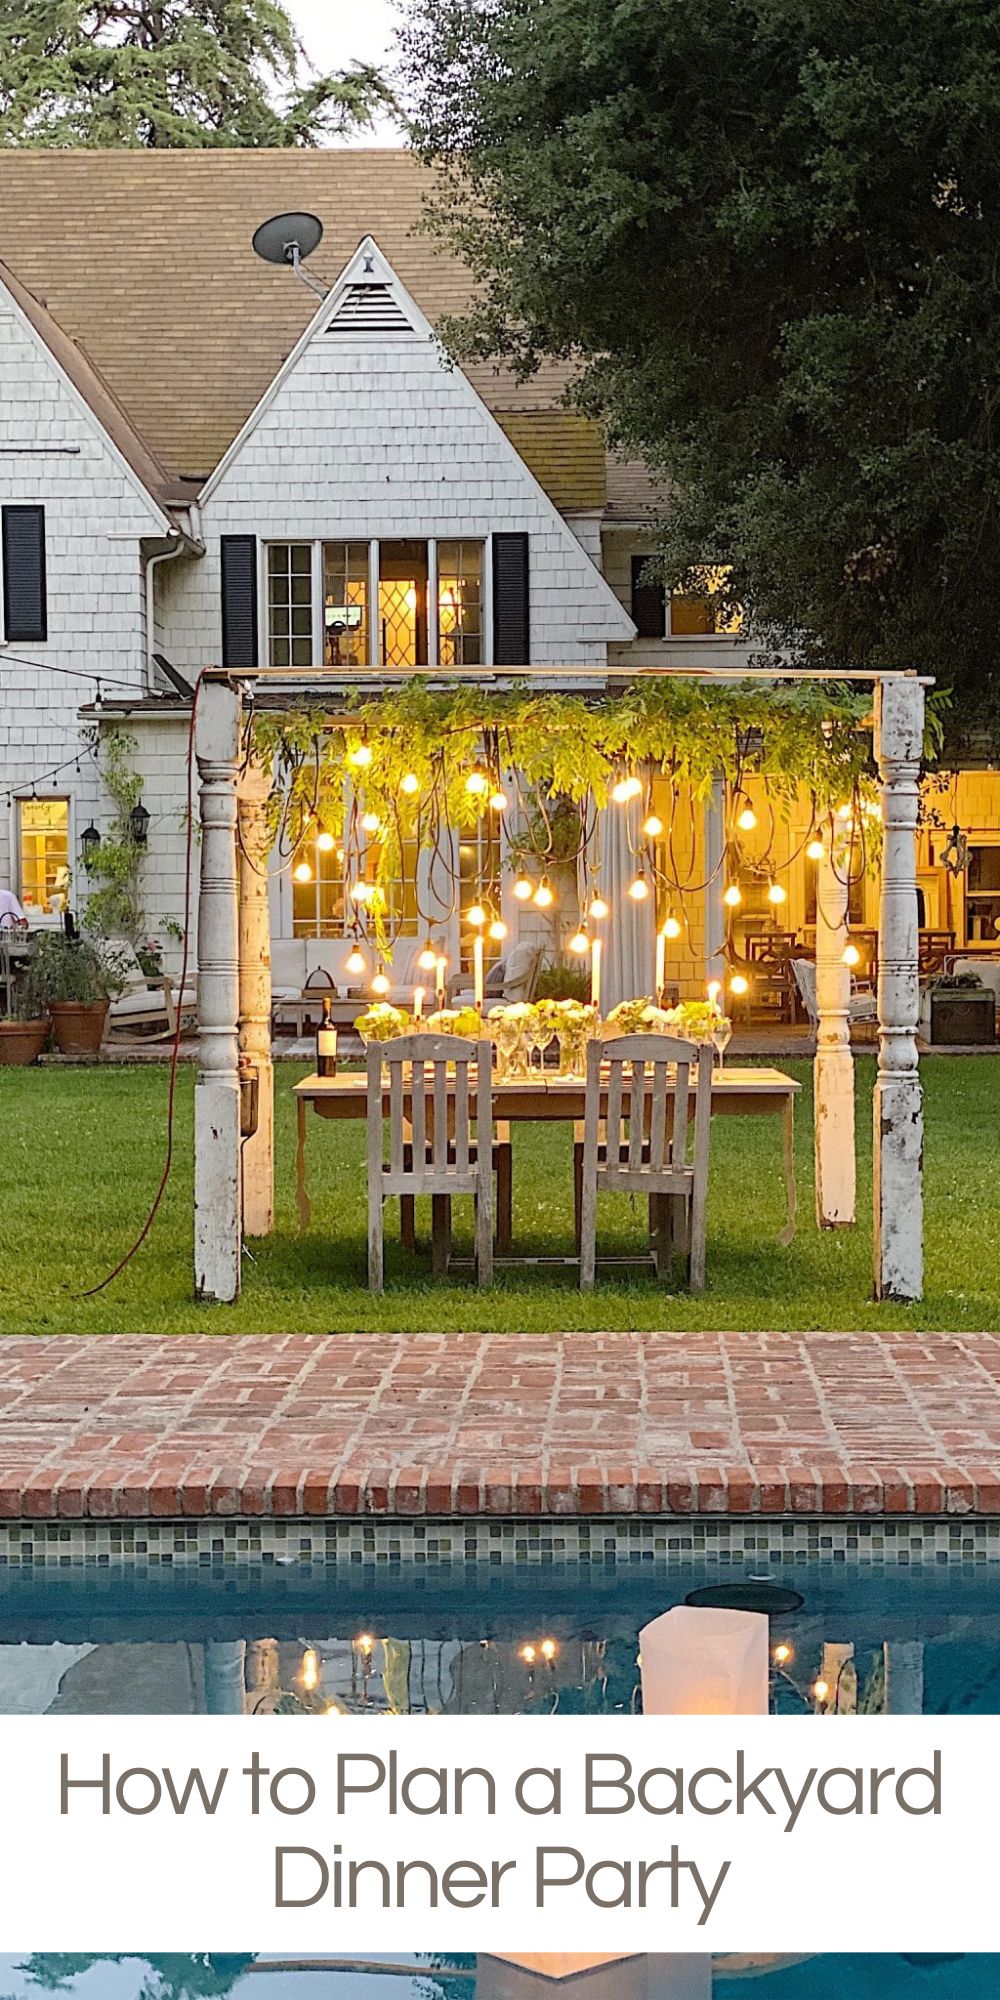 I love to plan parties. I created this backyard dinner party for my family. Everything … the location, lighting, and flowers were amazing.